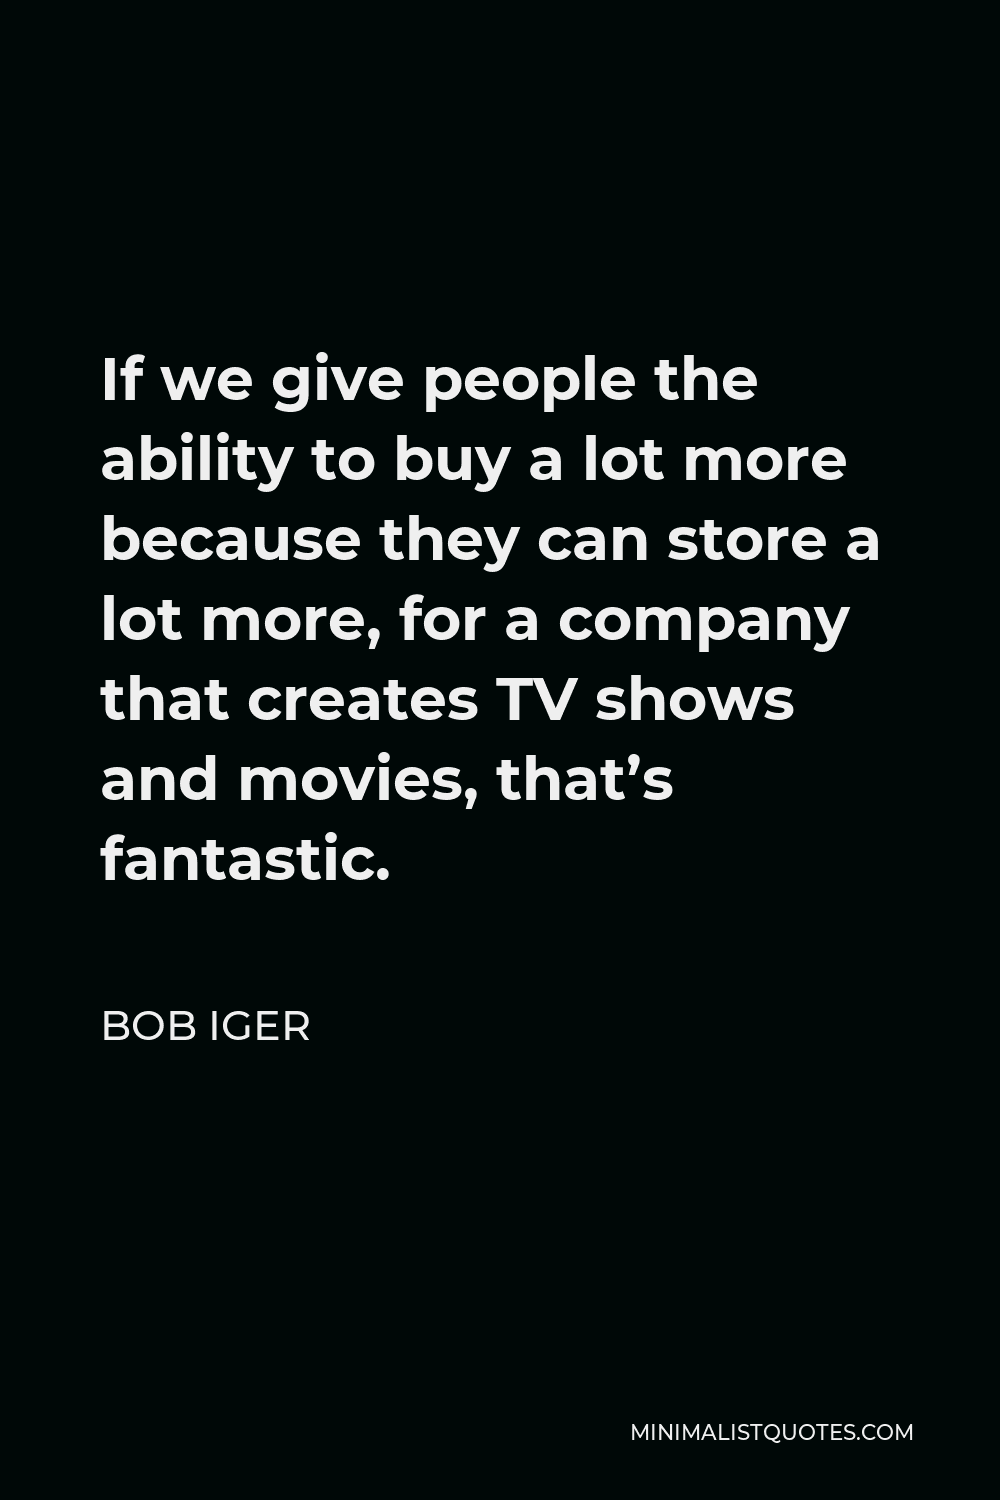 Bob Iger Quote - If we give people the ability to buy a lot more because they can store a lot more, for a company that creates TV shows and movies, that’s fantastic.